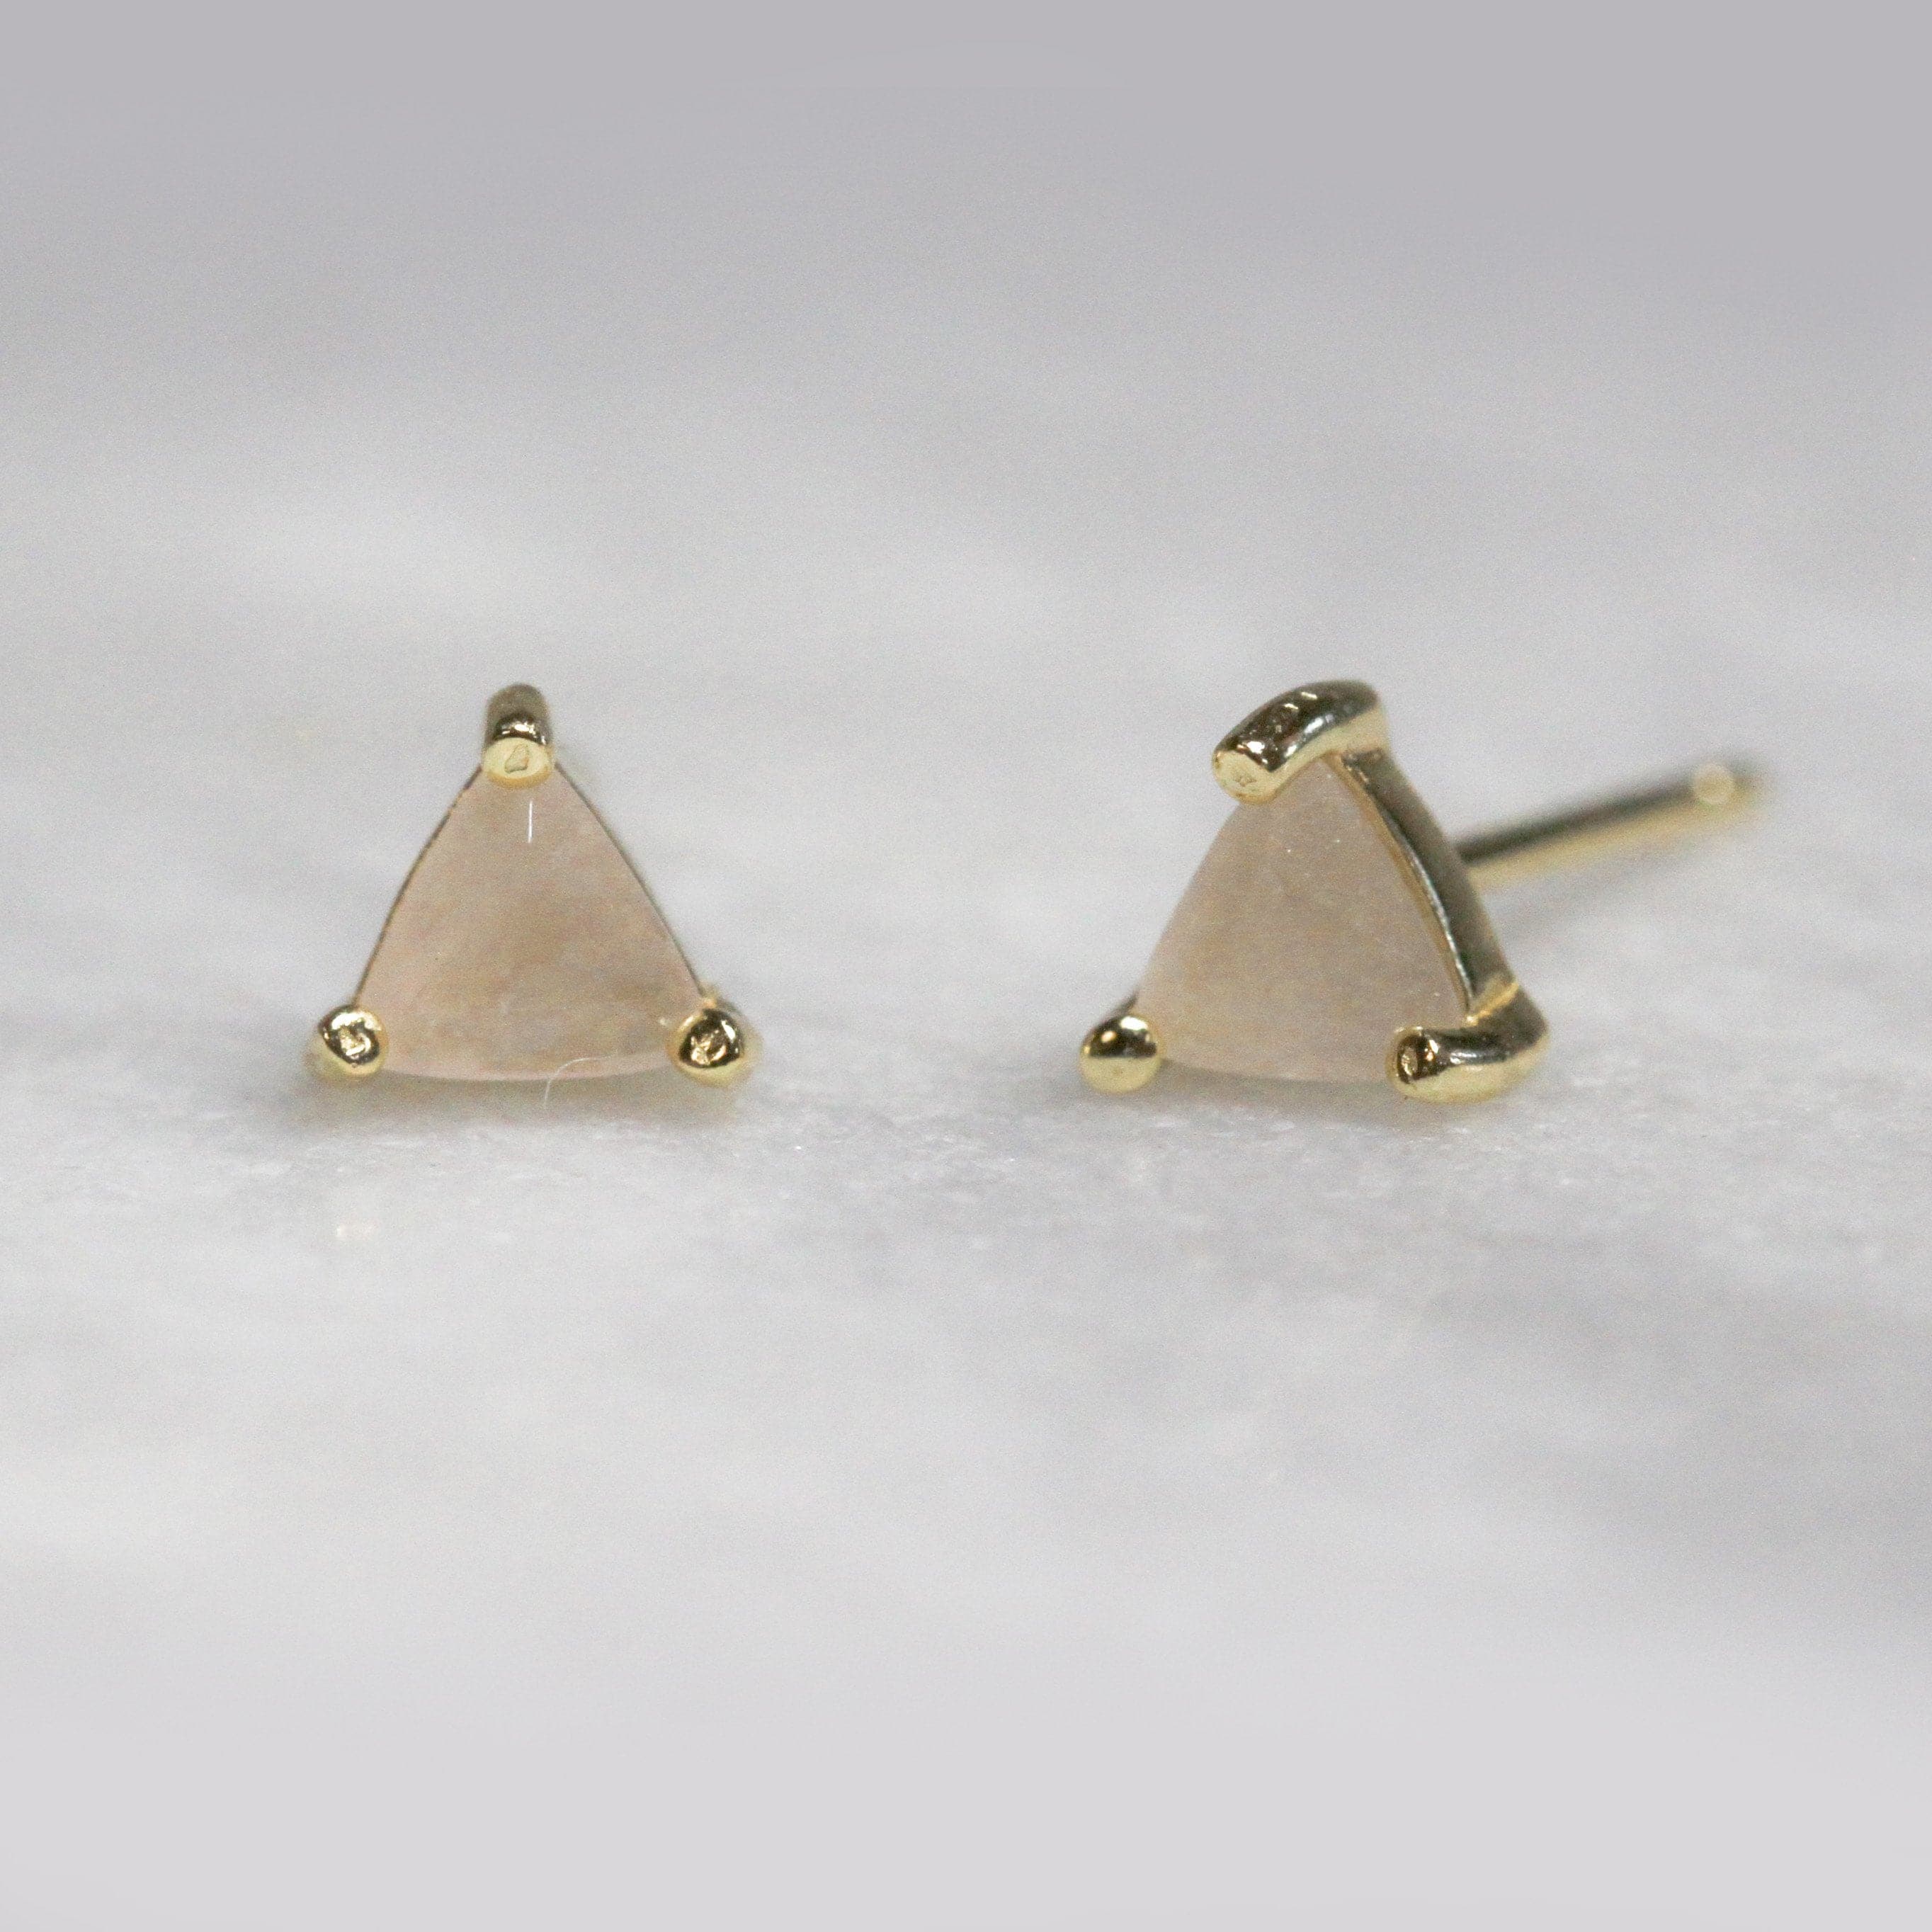 In front of a white background is a pair of rose quartz studs. The crystal is shaped like a triangle with a gold post on each corner. 